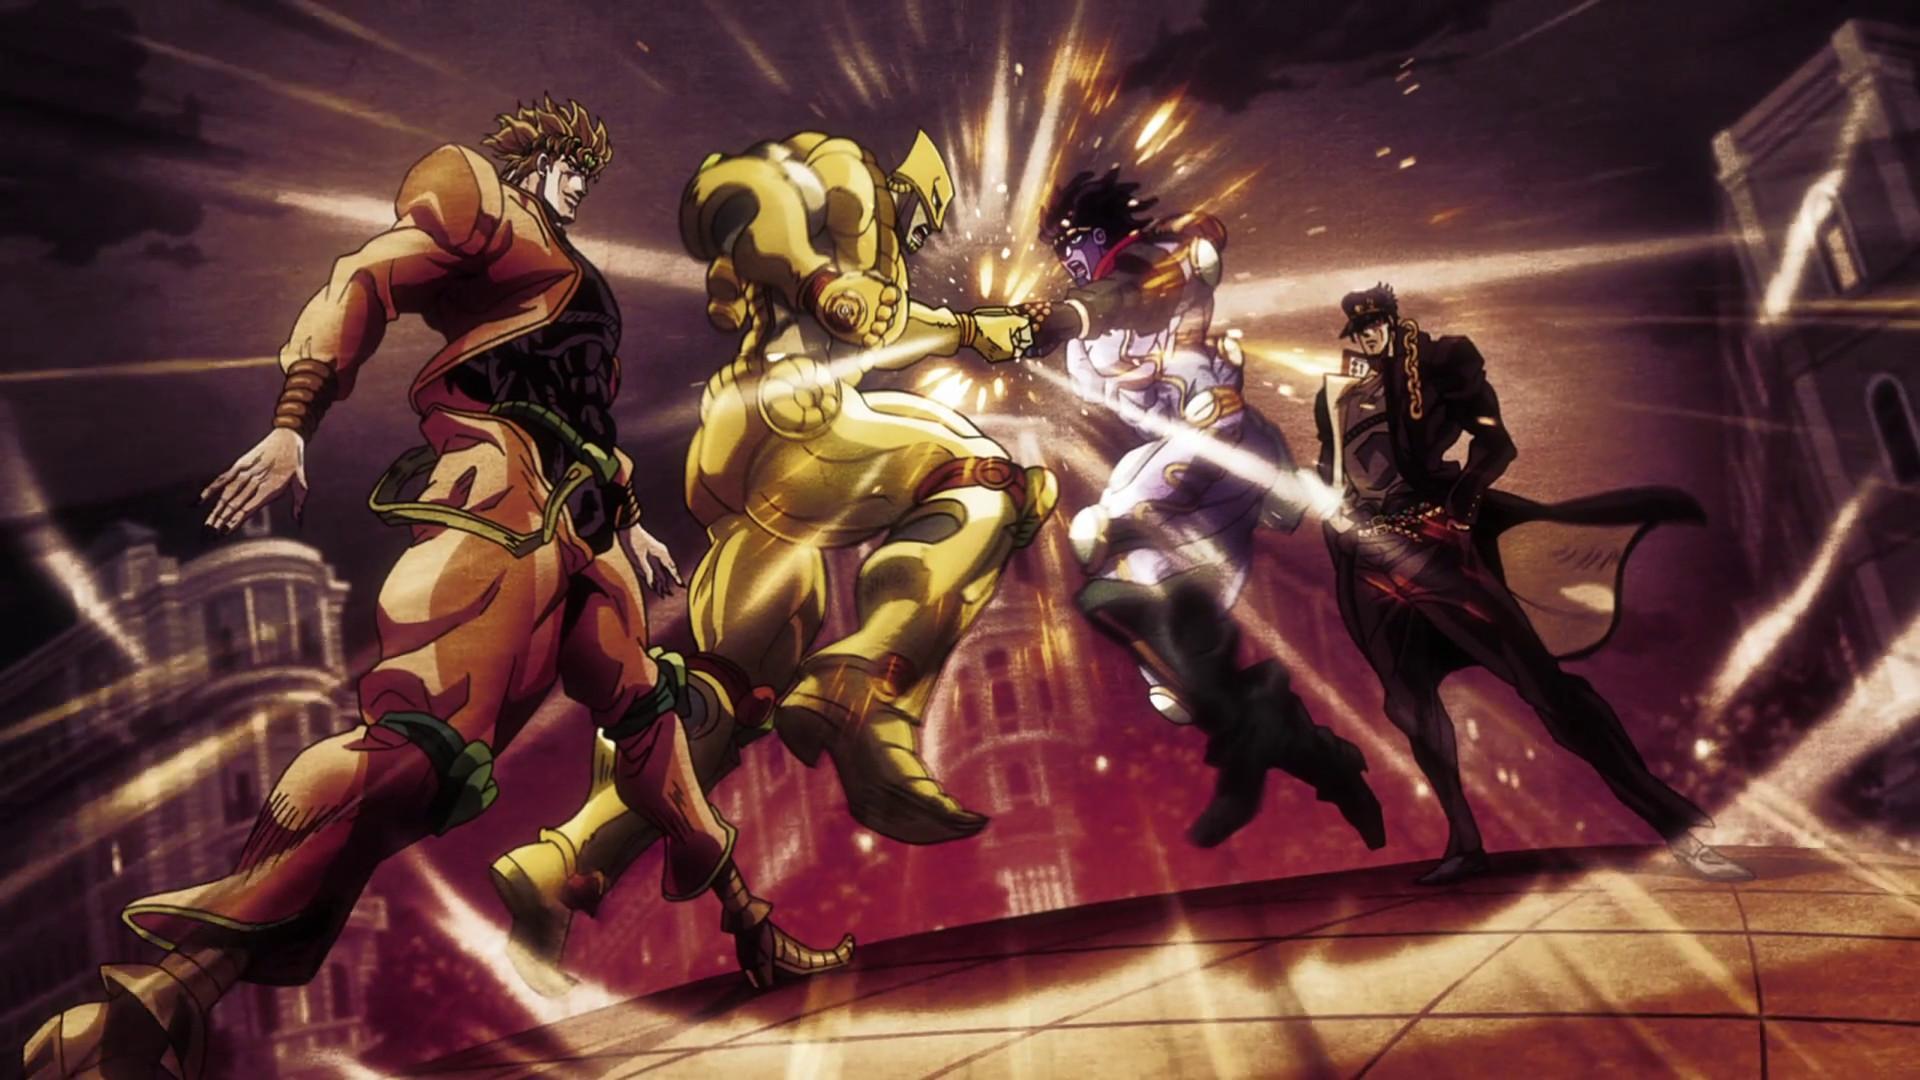 There is a dio shadow pose in part 7 : r/ShitPostCrusaders